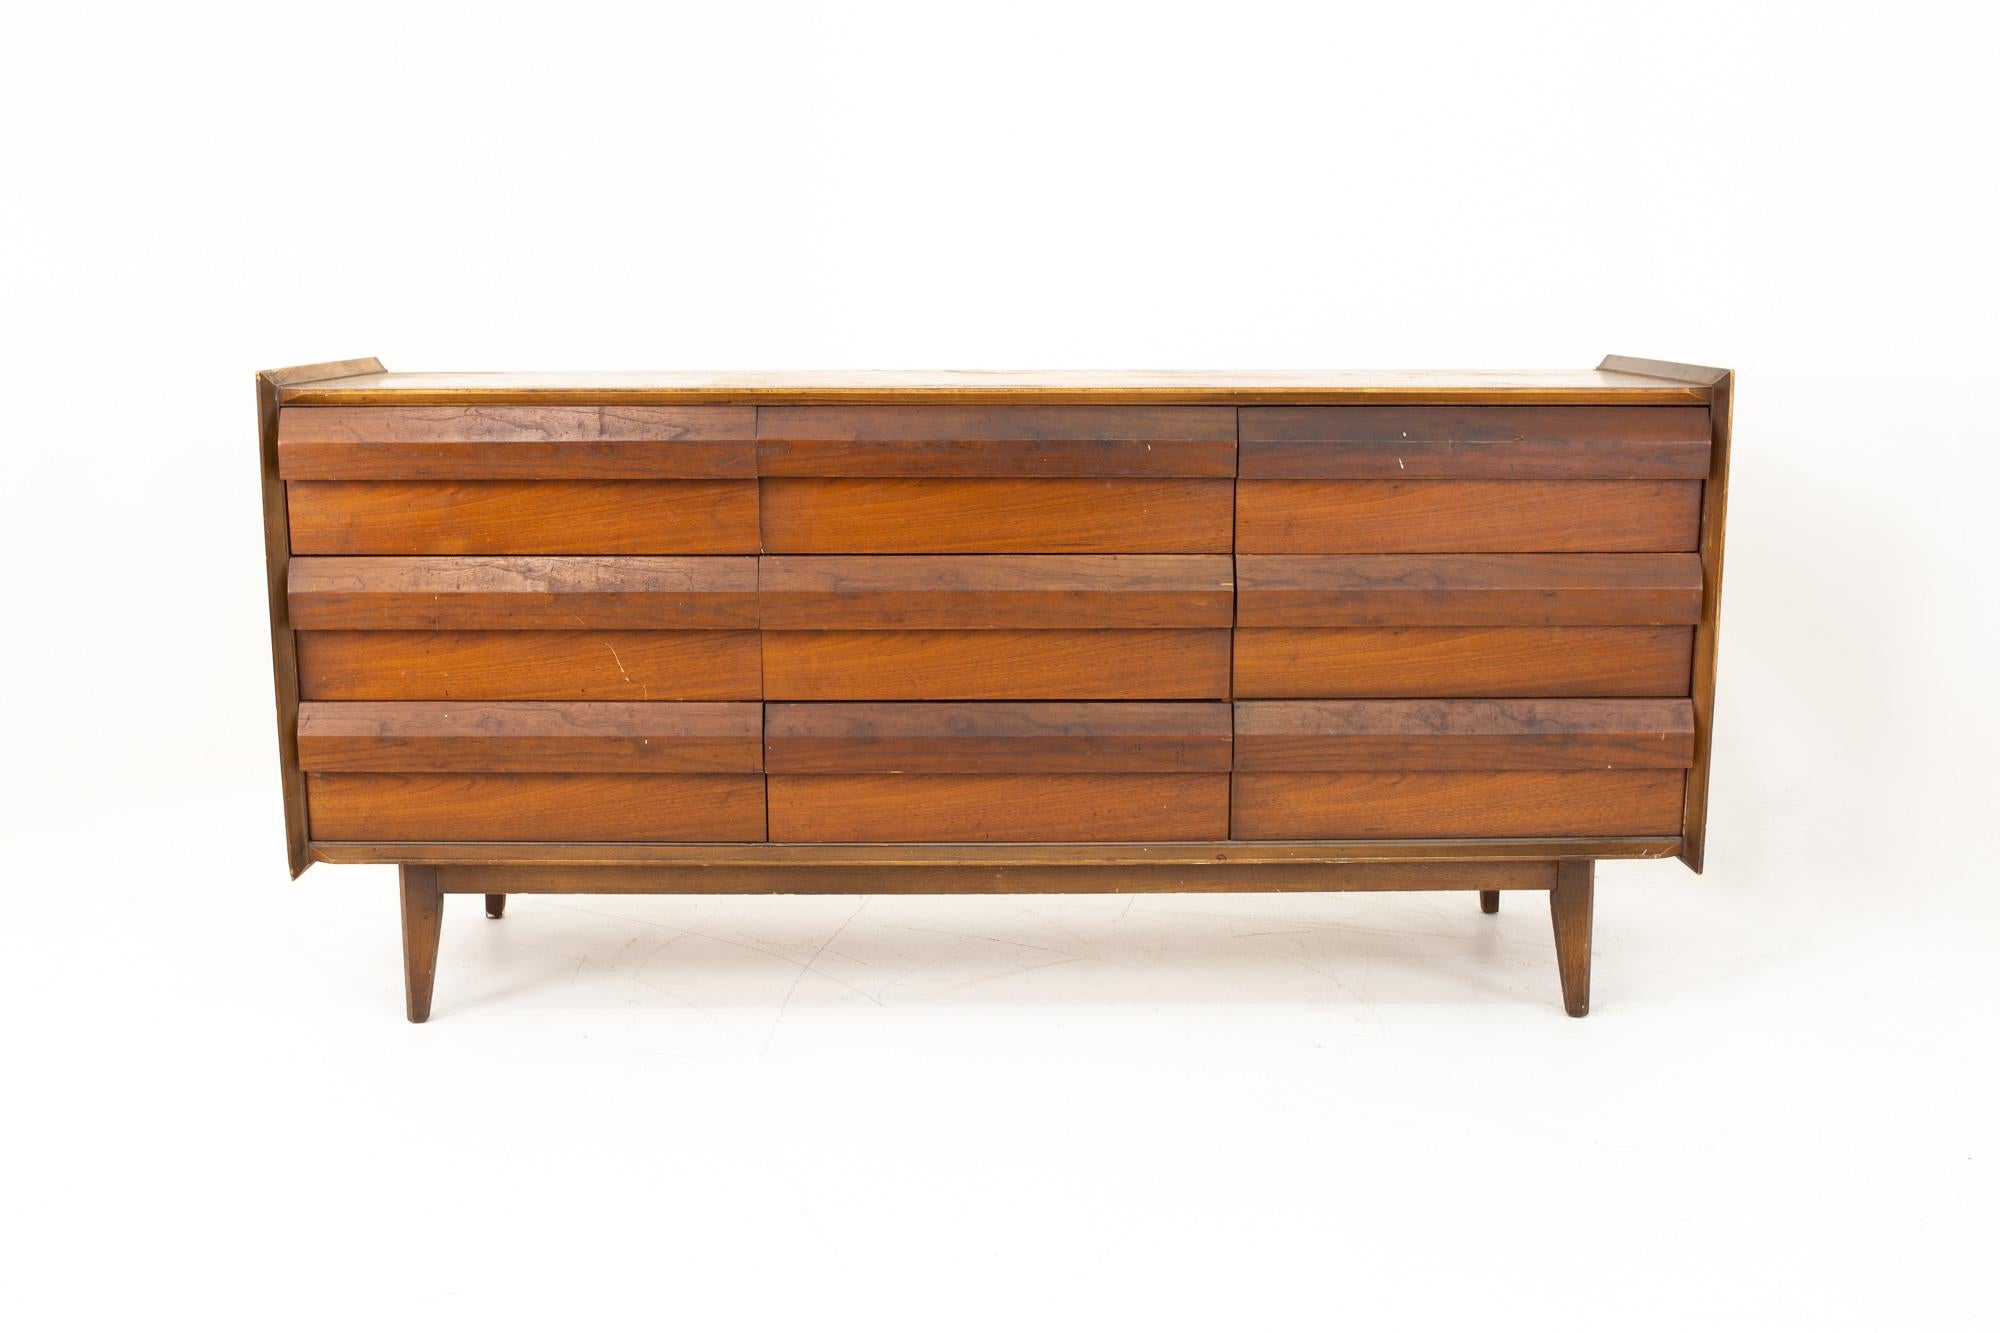 Lane first edition midcentury walnut 9-drawer lowboy dresser

Dresser measures: 66 wide x 18 deep x 30 high

This price includes getting this piece in what we call restored vintage condition. That means the piece is permanently fixed upon